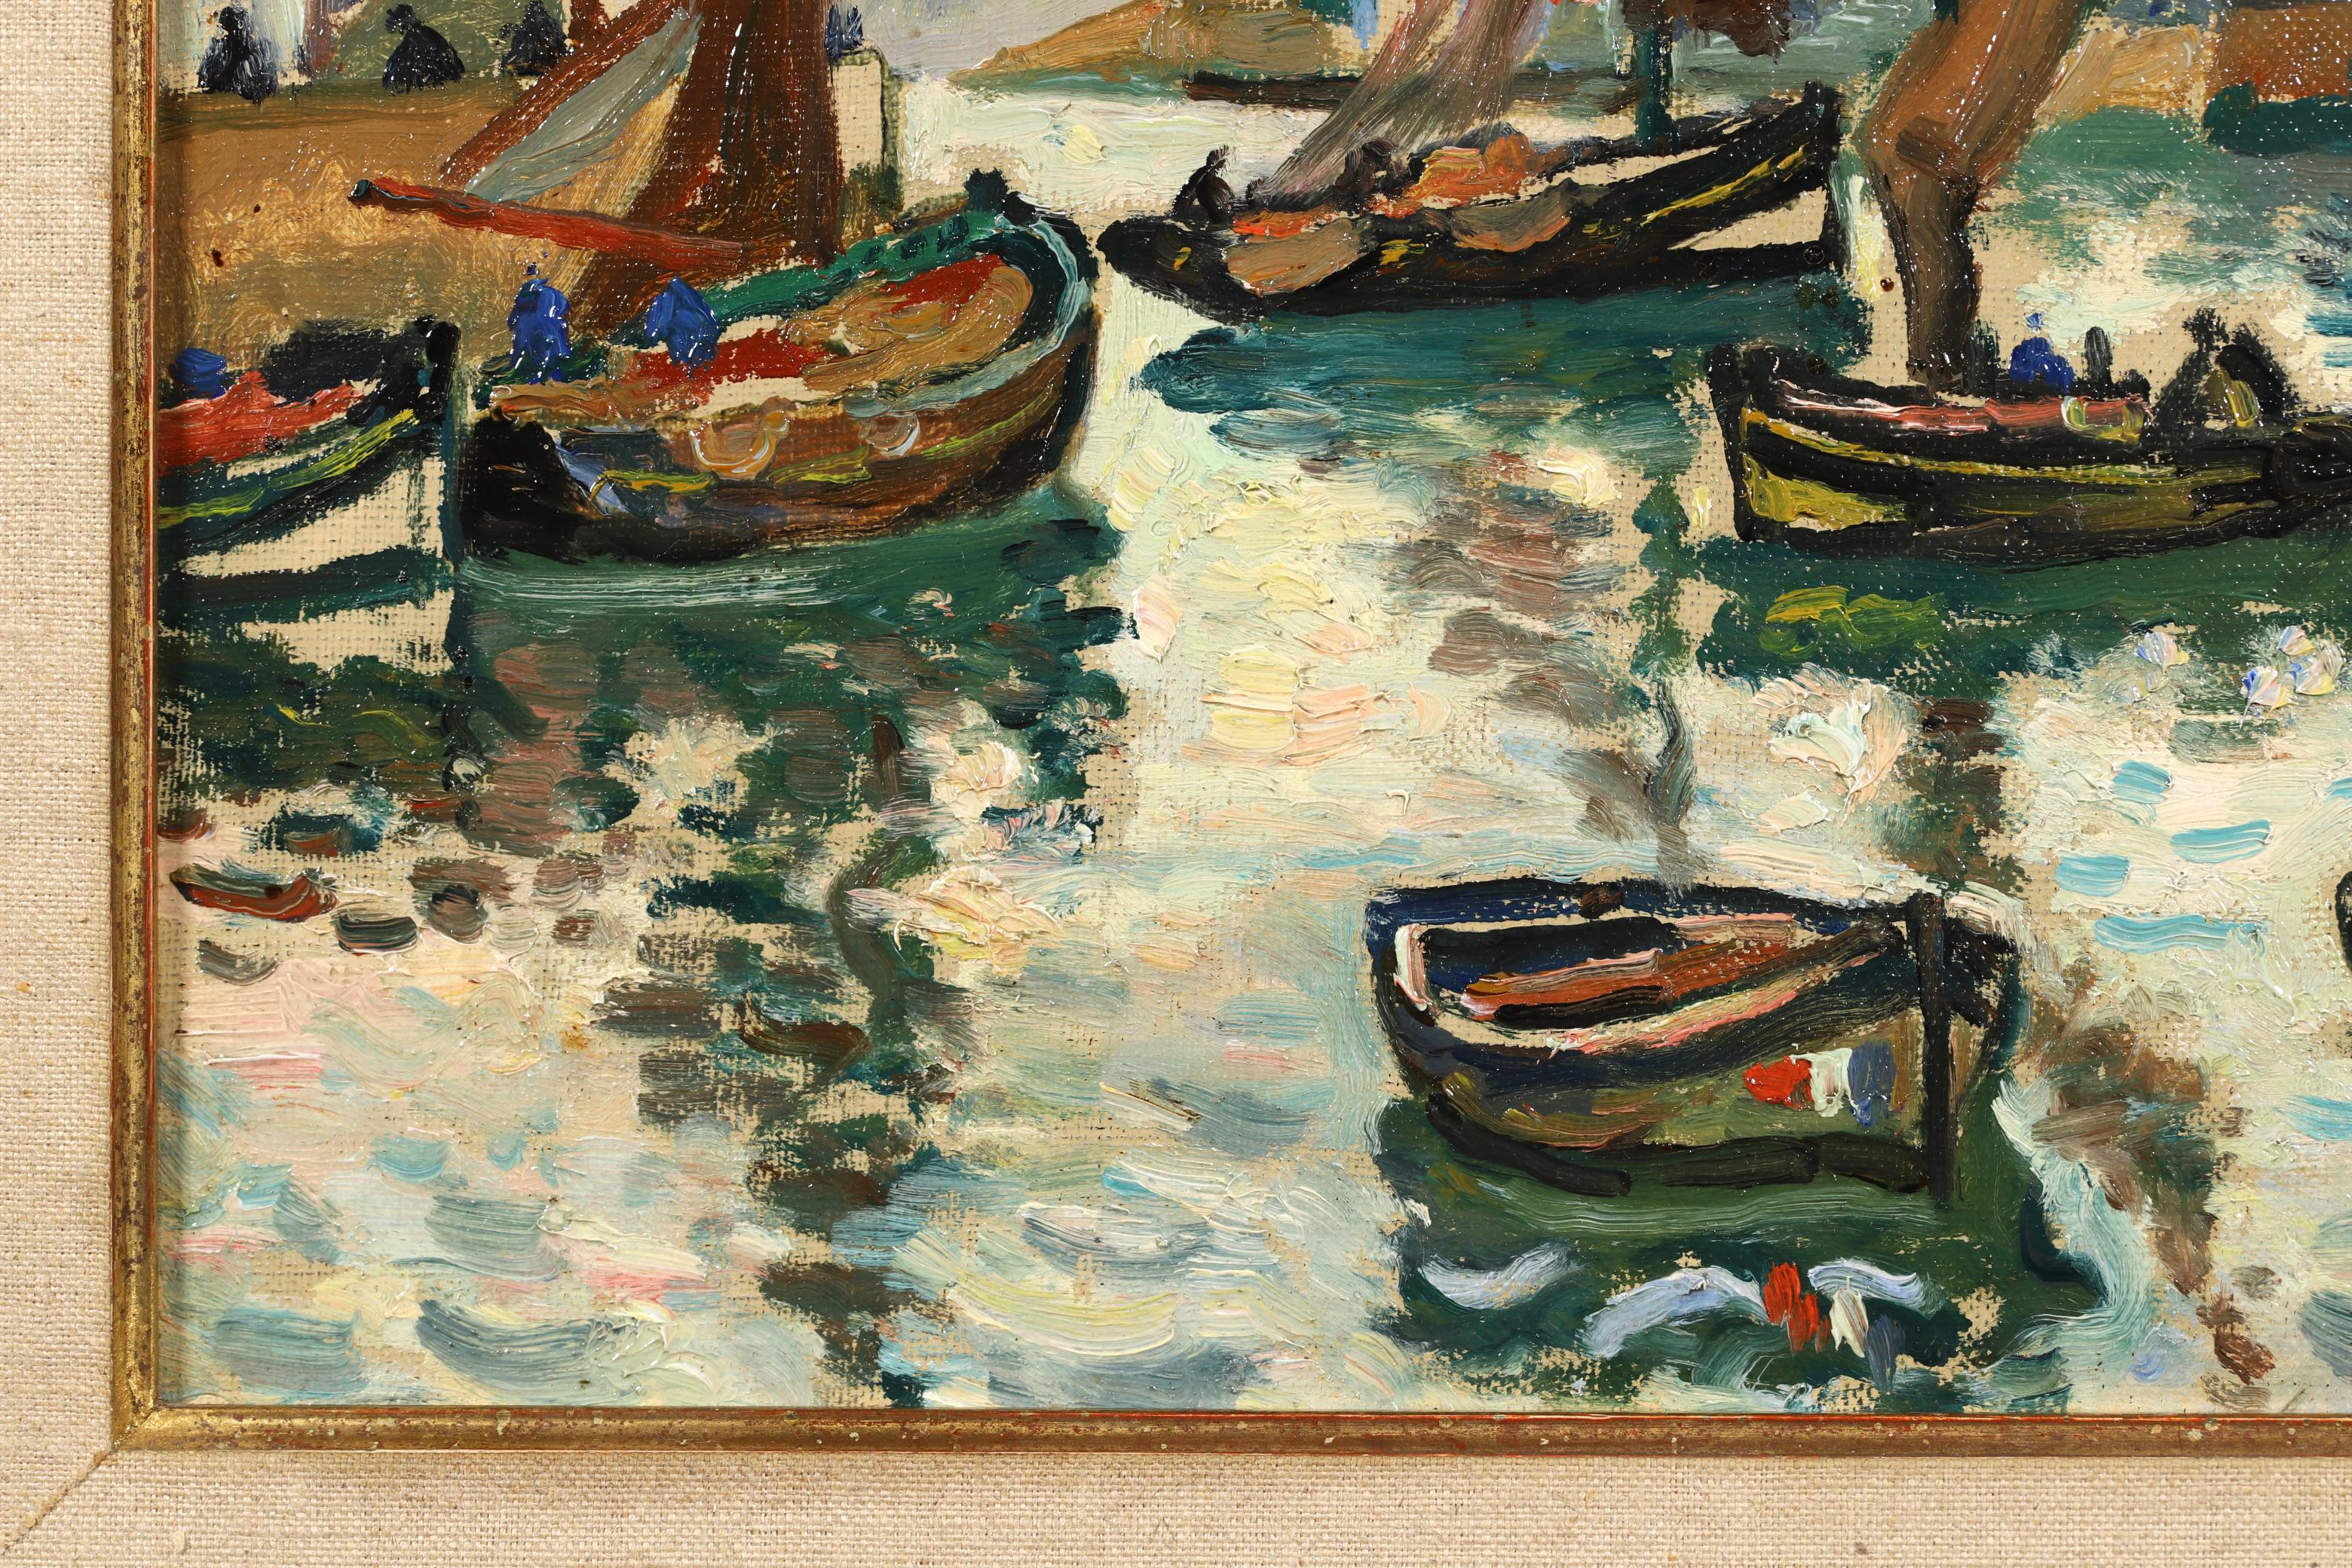 Signed oil on board figures in seascape painting circa 1910 by French post impressionist painter Henri Liénard de Saint-Délis. The work depicts sailing boats in the harbour flying the French Tricolore flag.

Signature:
Signed lower